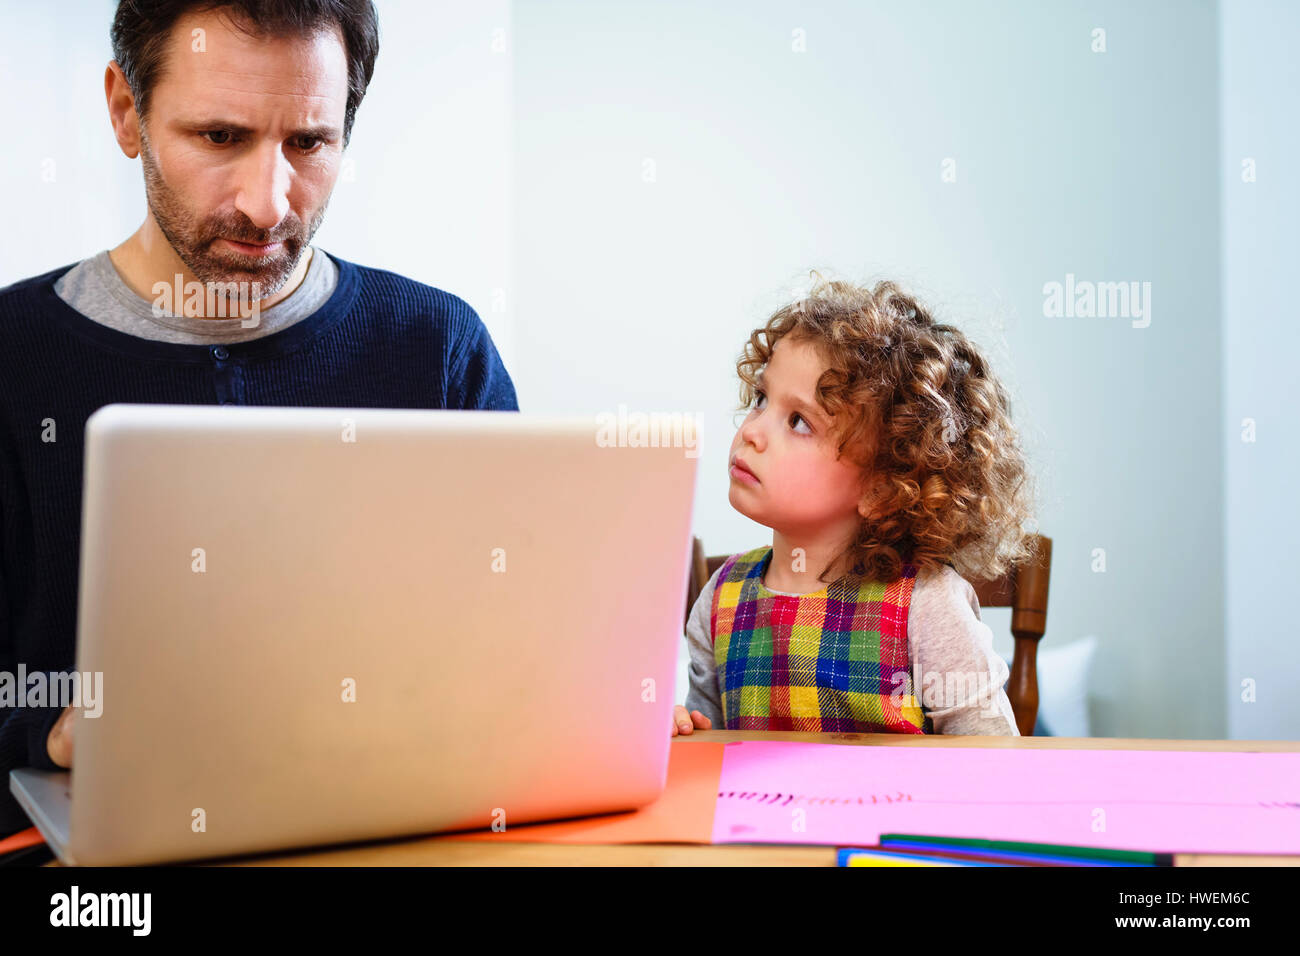 Girl staring at father using laptop at table Stock Photo